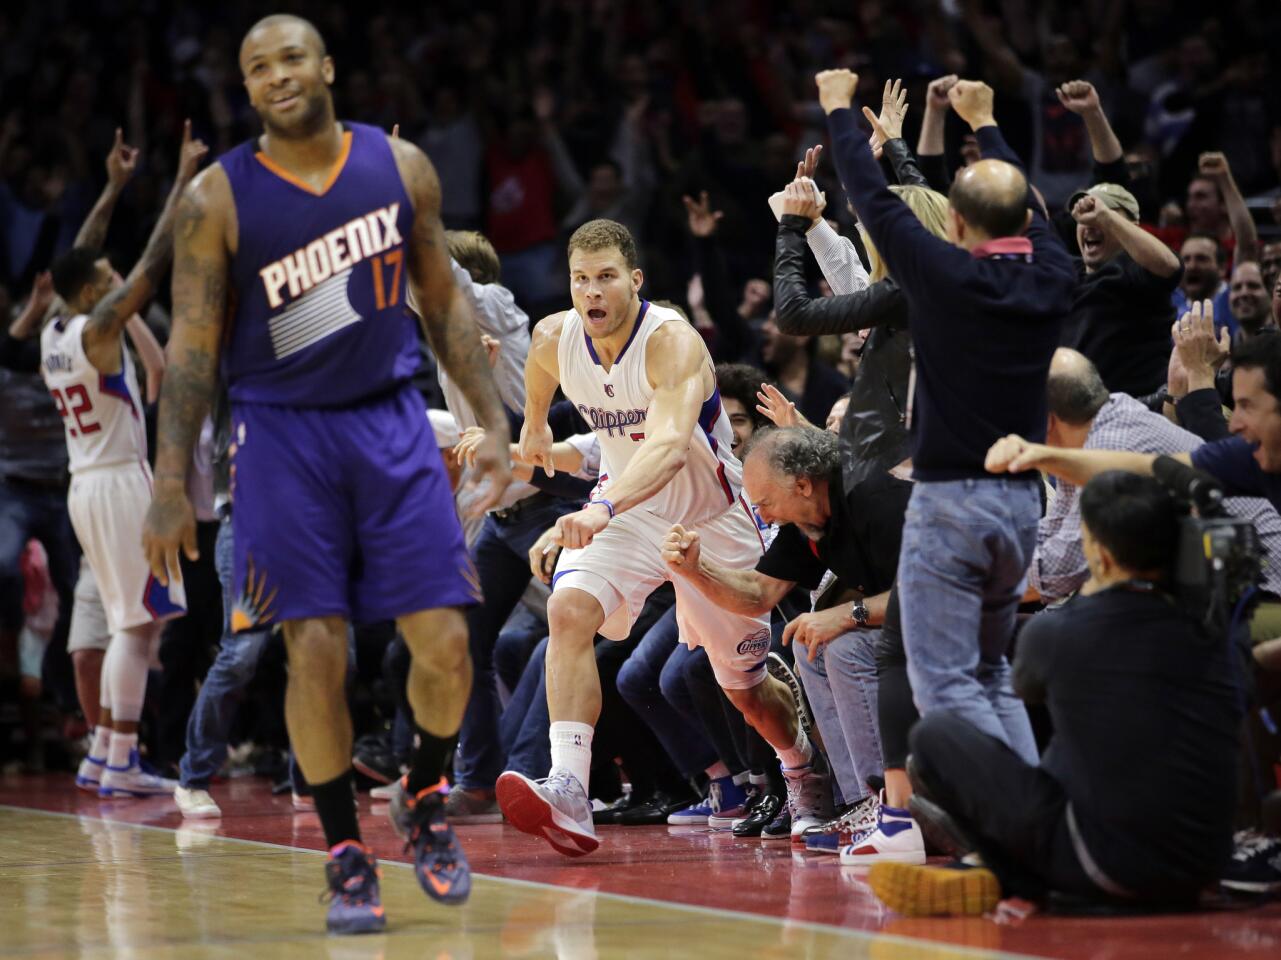 Blake Griffin celebrates after hitting a game-winning three-pointer against the Suns. Griffin had 45 points in the Clippers' 121-120 win over the Suns in overtime.